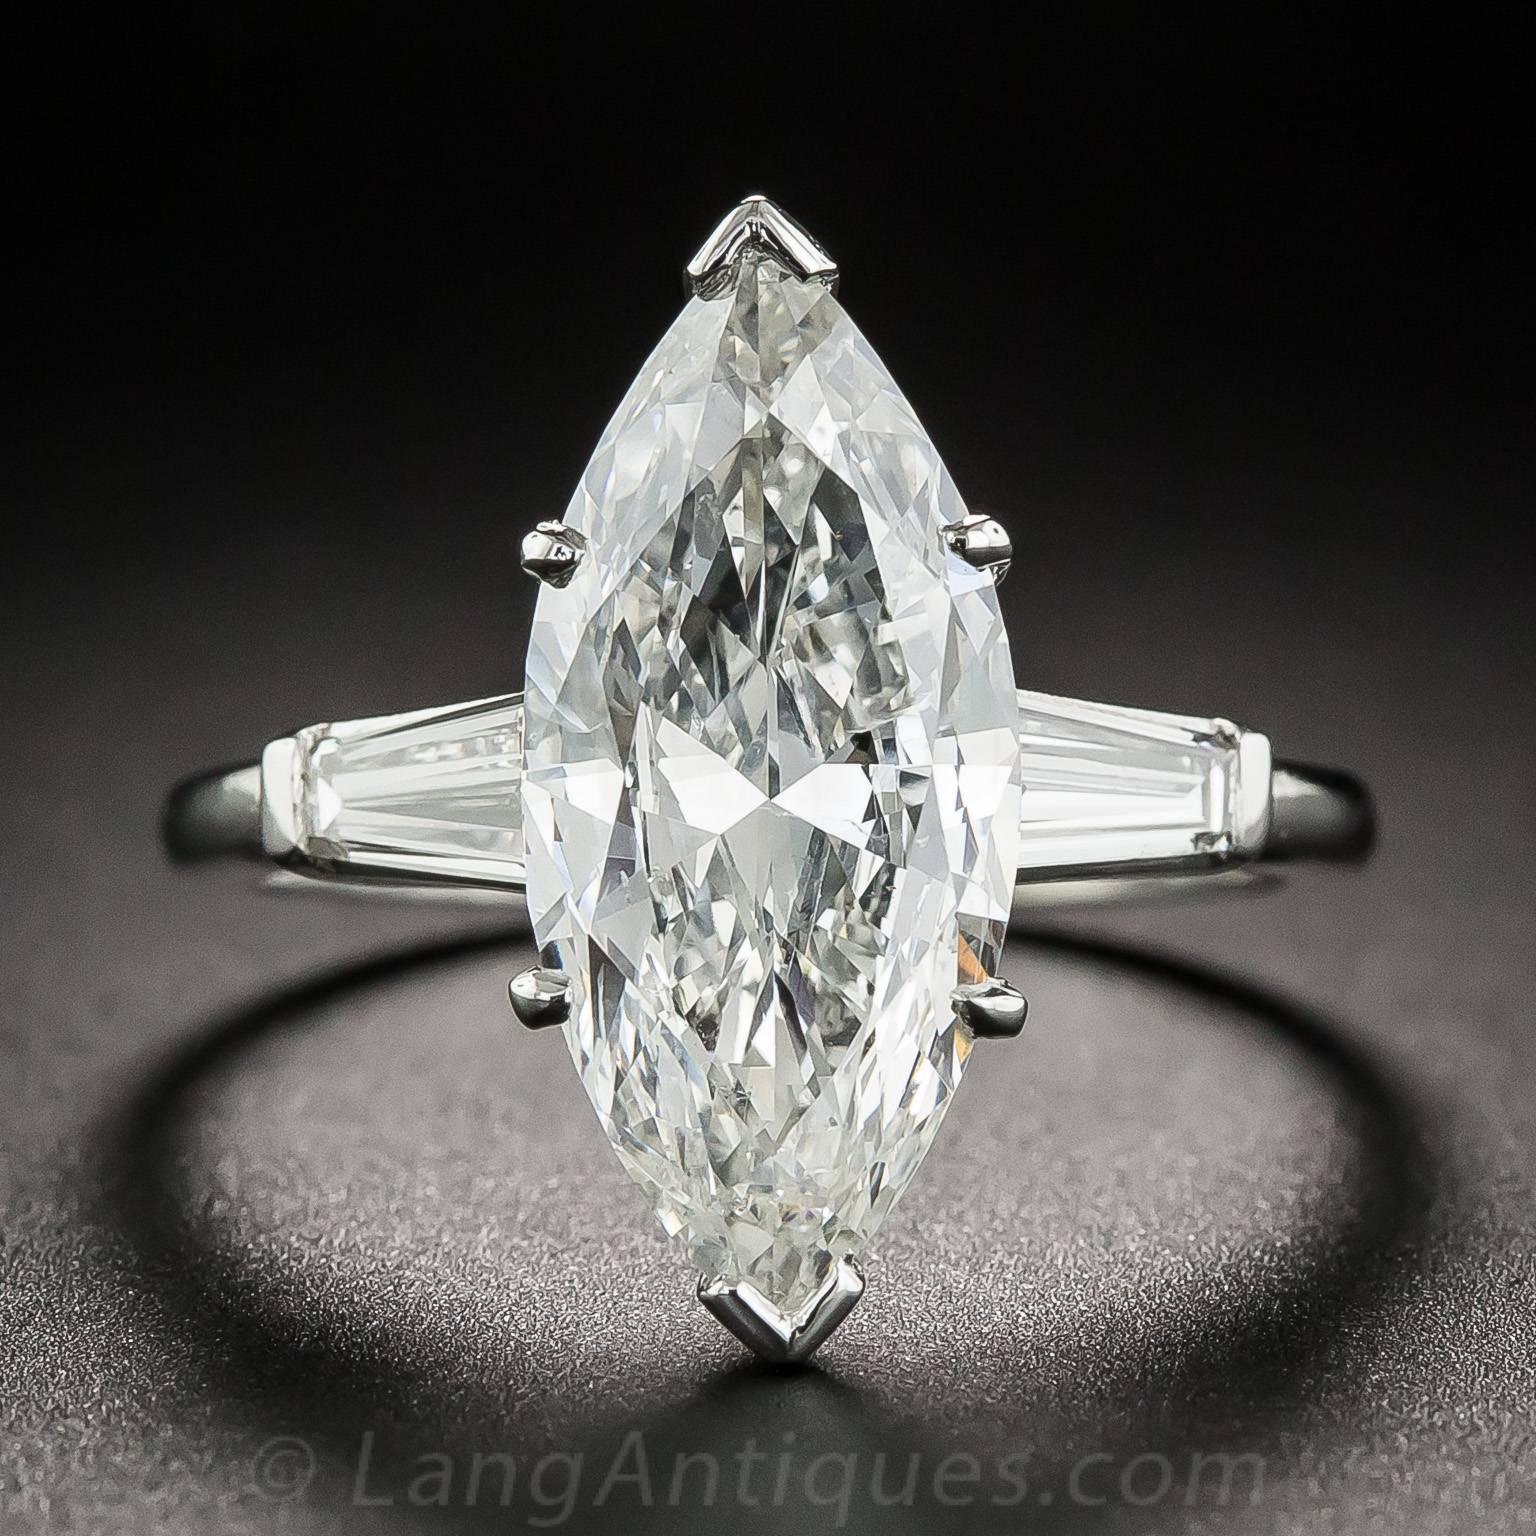 A stunning, sleekly modeled marquise-cut diamond, weighing 3.71 carats, is classically presented in a hand-fabricated platinum ring between a pair of bright tapered baguette diamonds, together weighing .50 carat. The sparkling white, elegantly